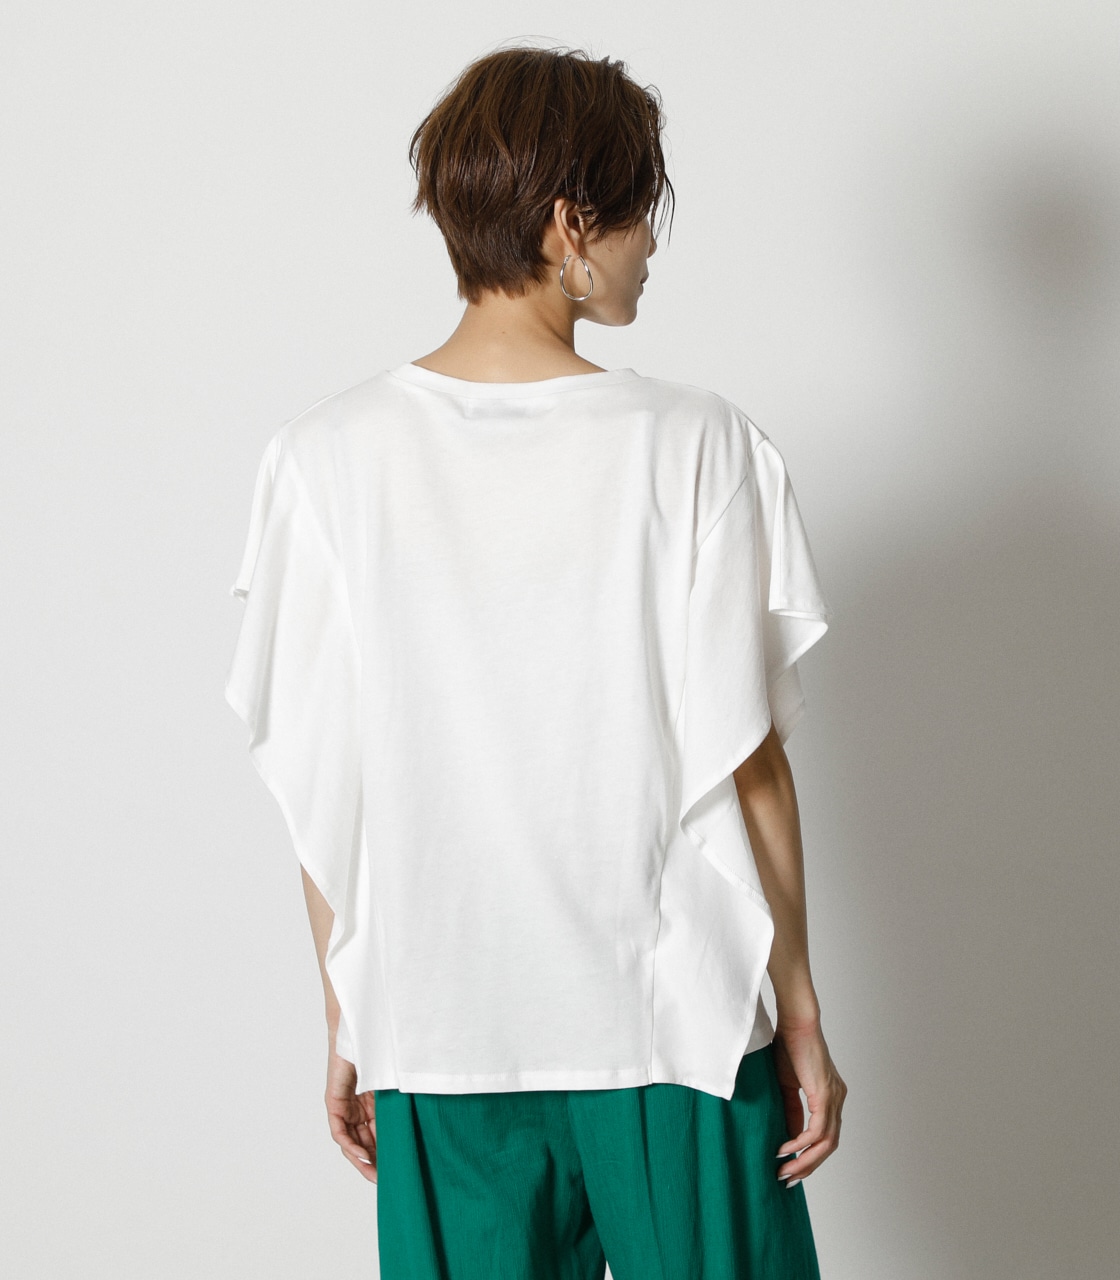 SLEEVE LAYERED TOPS/スリーブレイヤードトップス 詳細画像 O/WHT 7